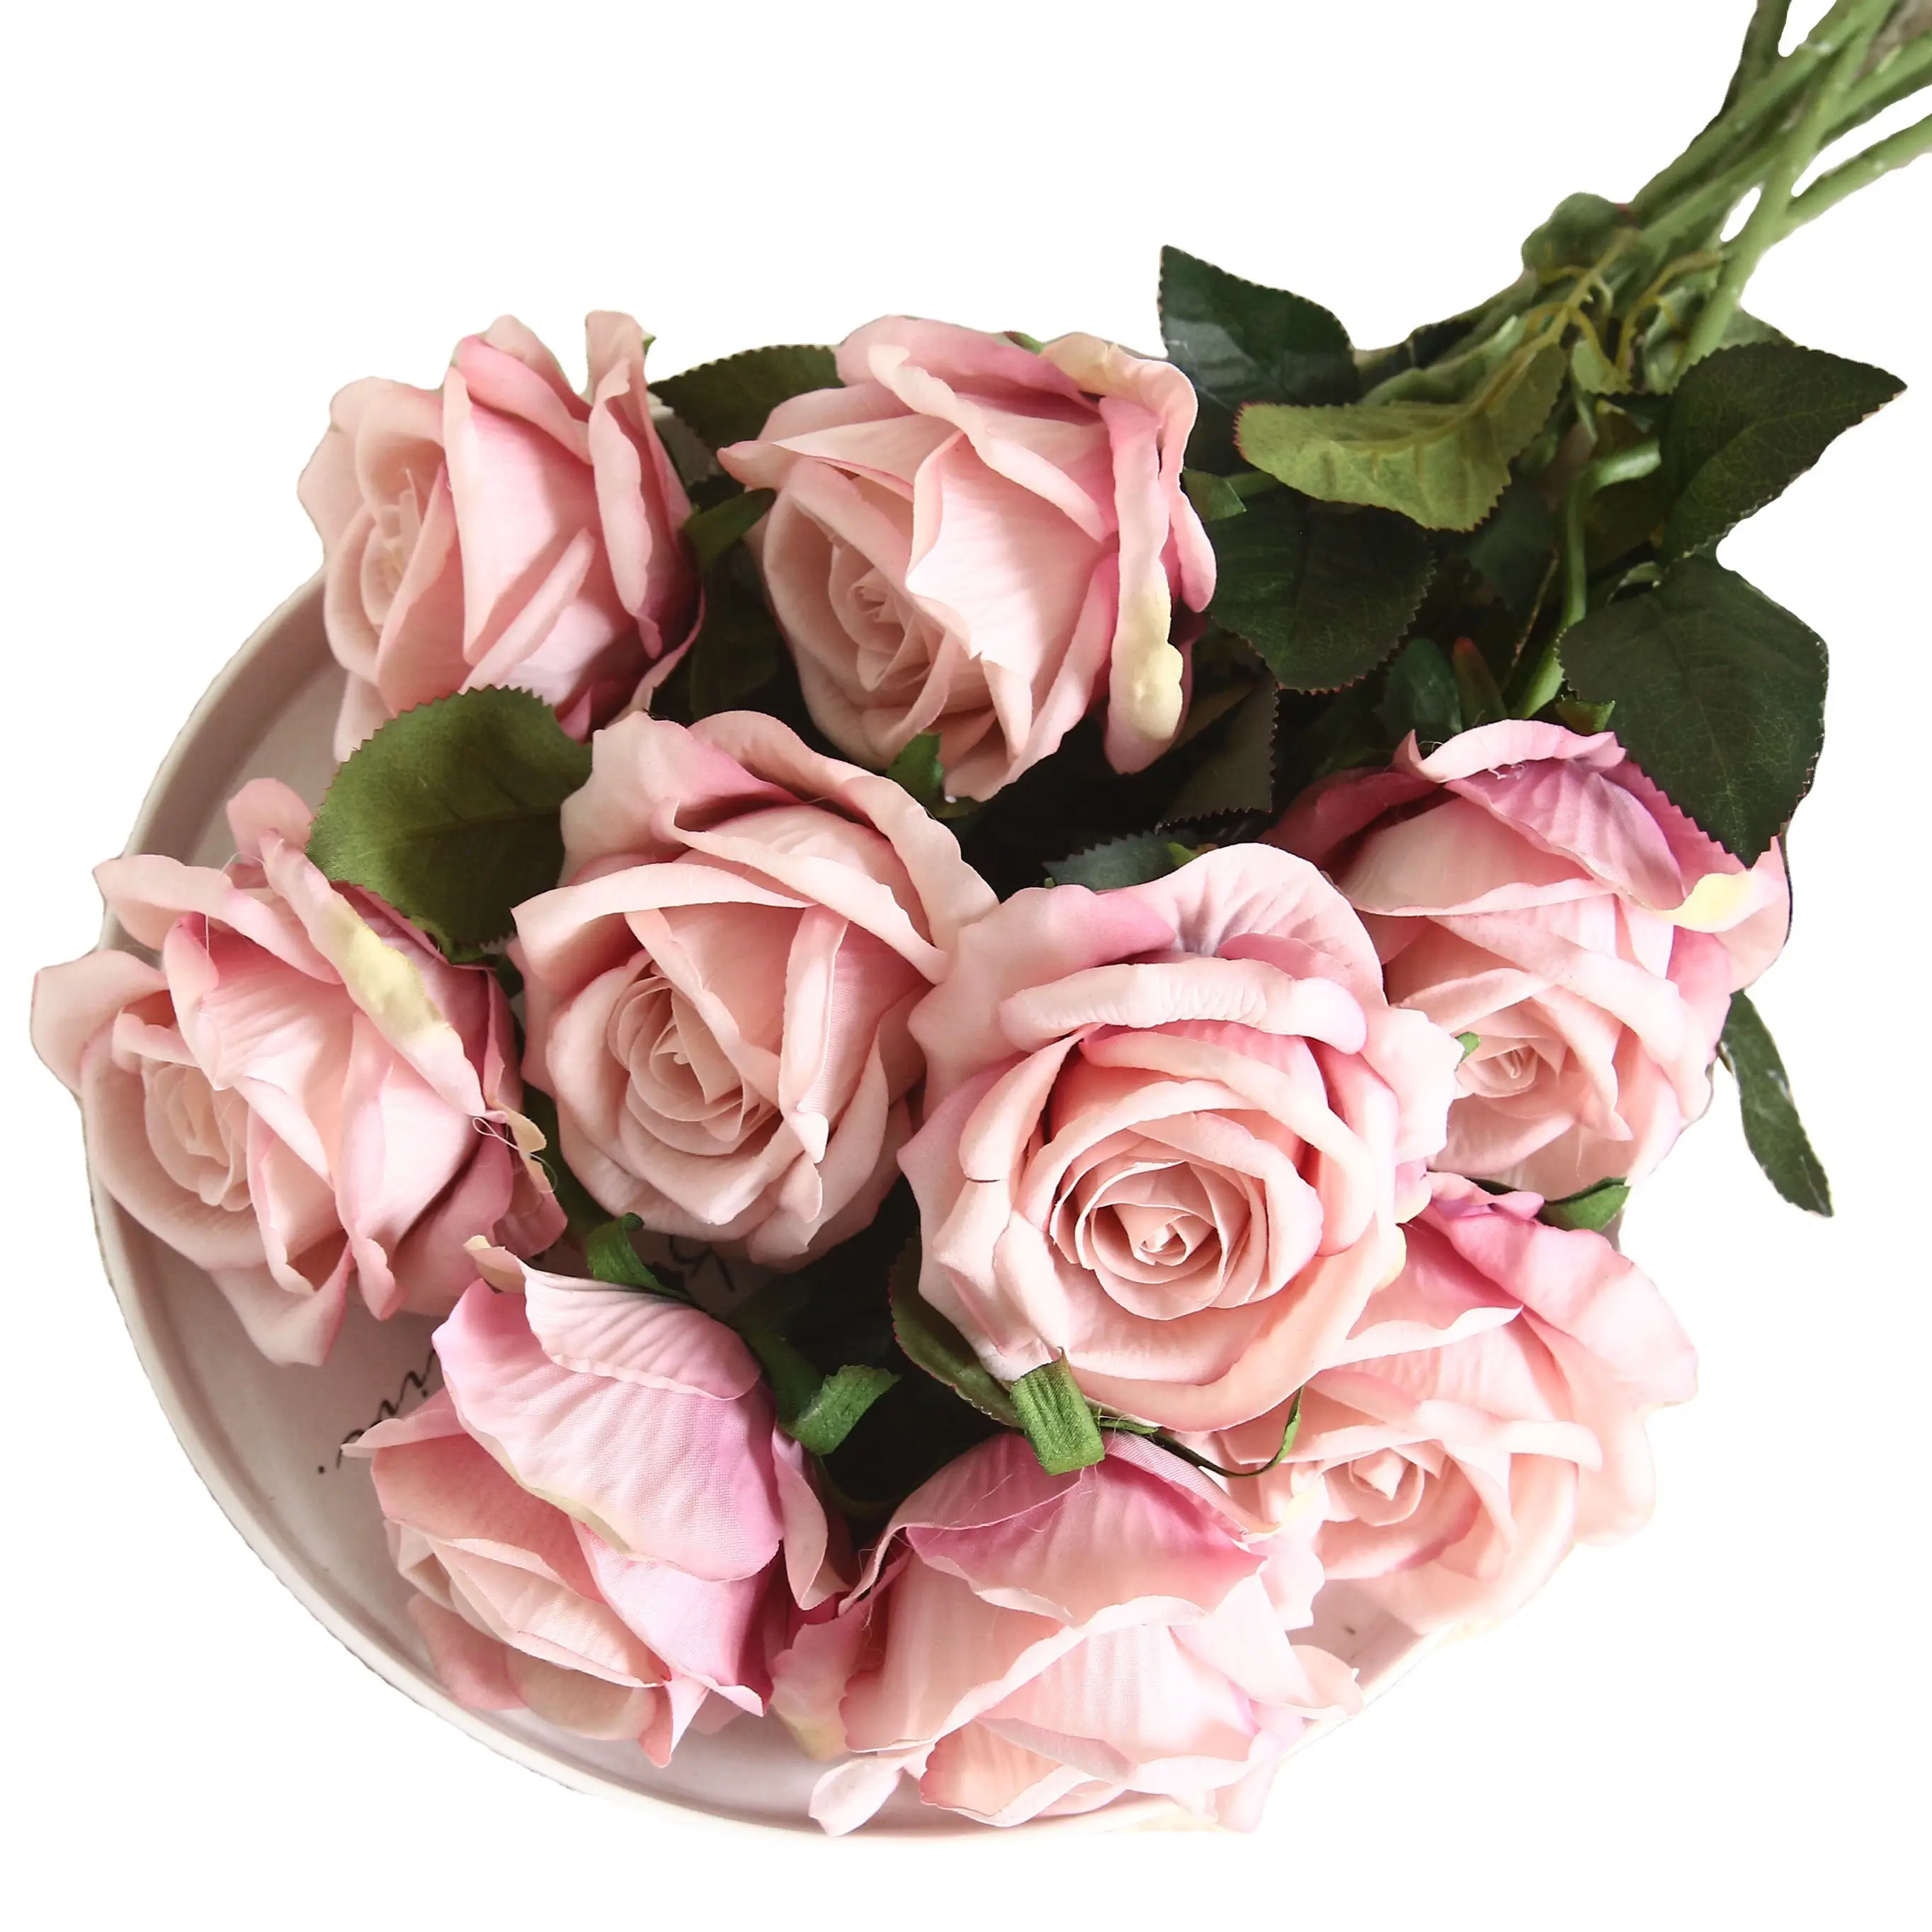 Cheap Price Real Touch Roses Silk Plants And Flowers Artificial Flowers for Decor Wedding Home Party